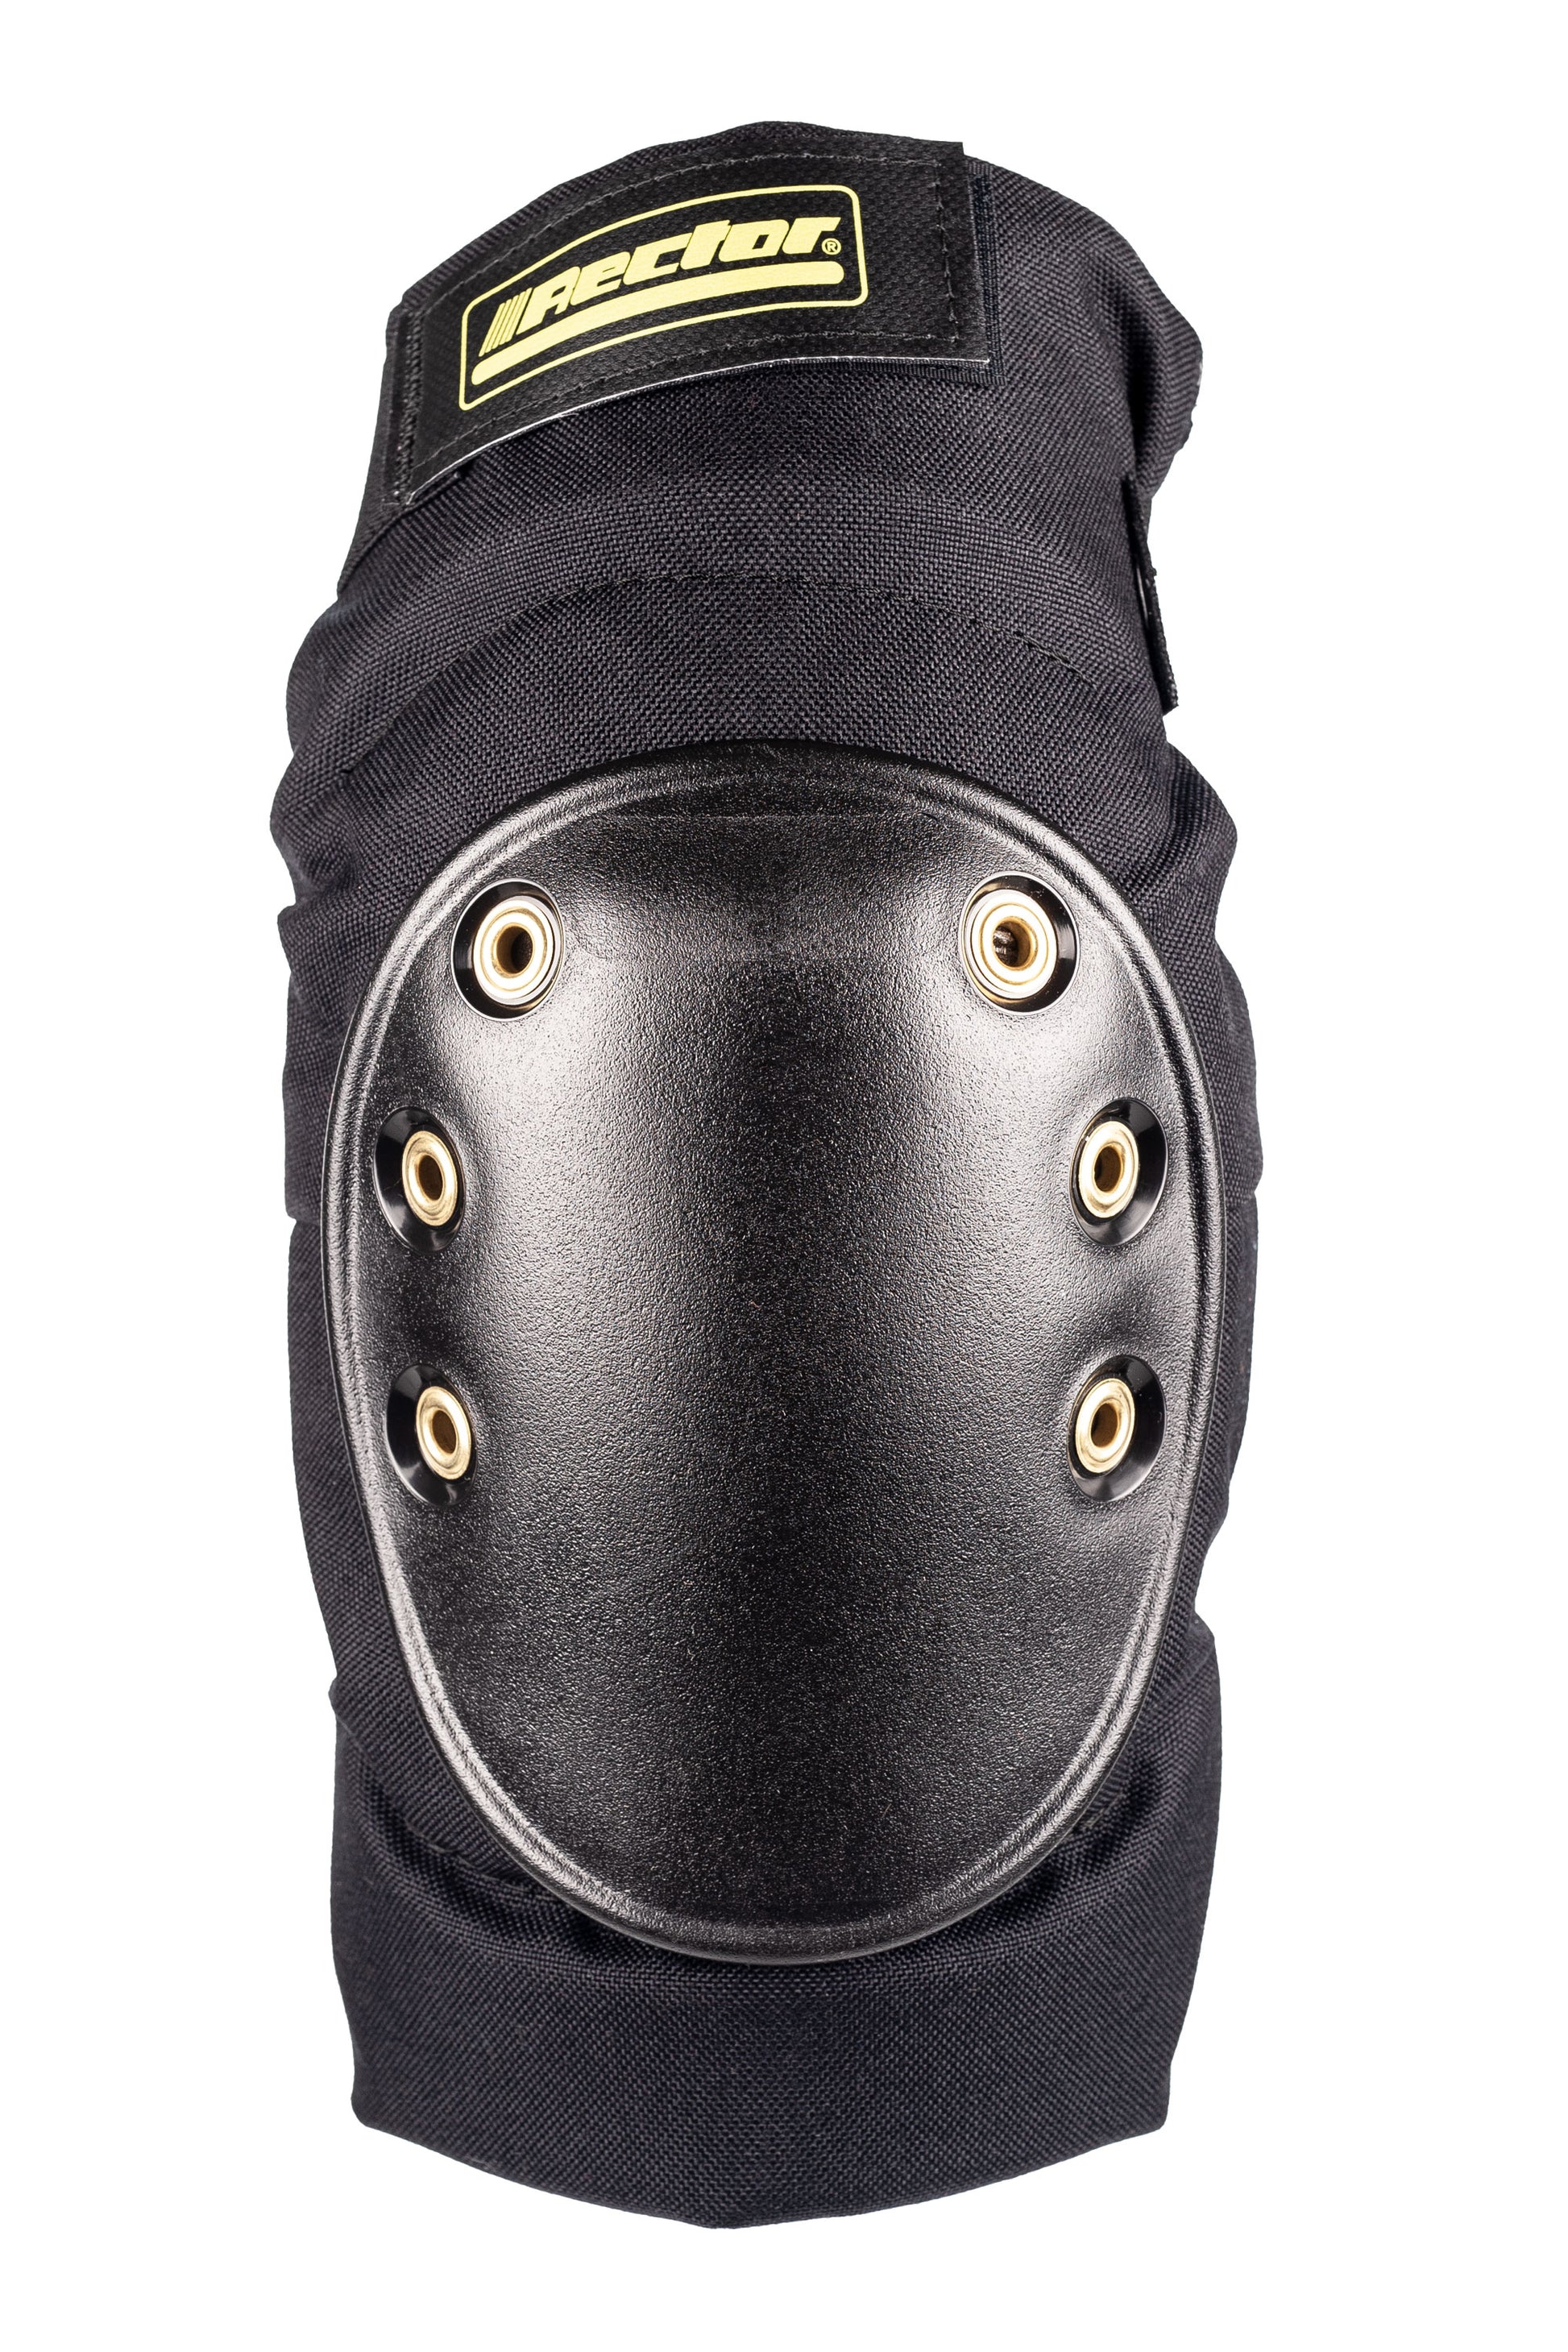 RECTOR® SPORTS FATboy™ Knee Pads